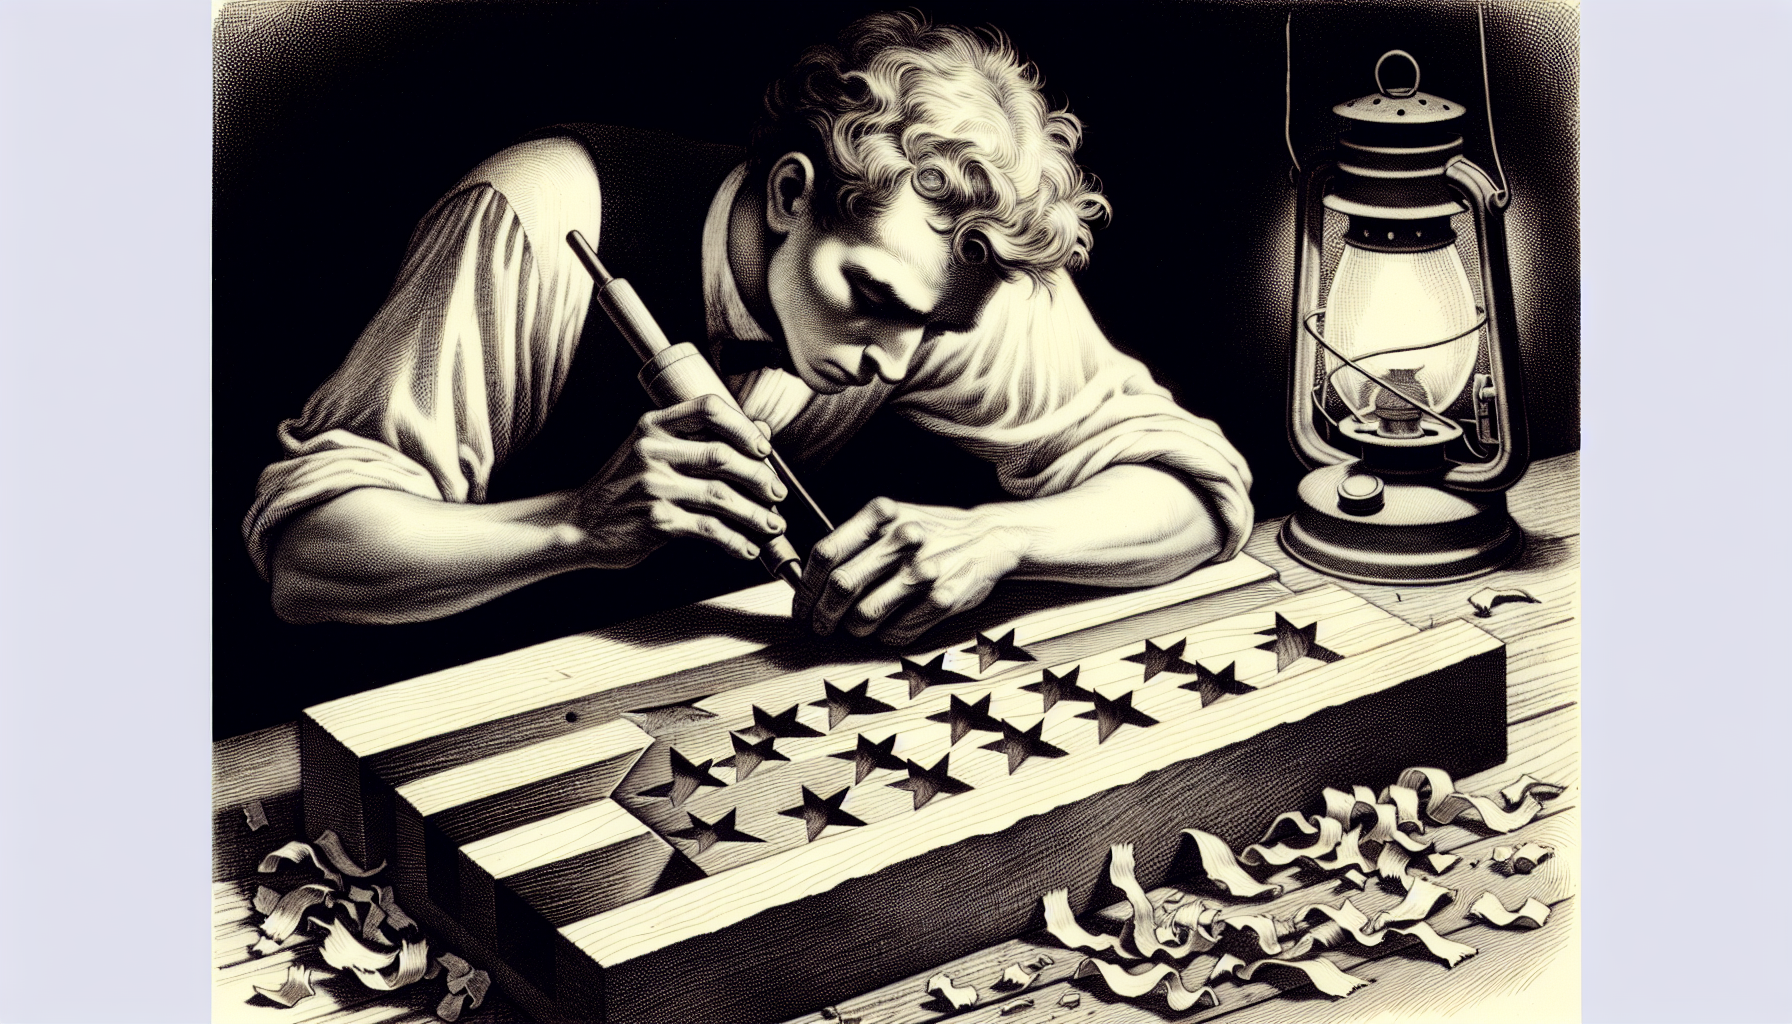 Carving stars into the union section of the wooden American flag